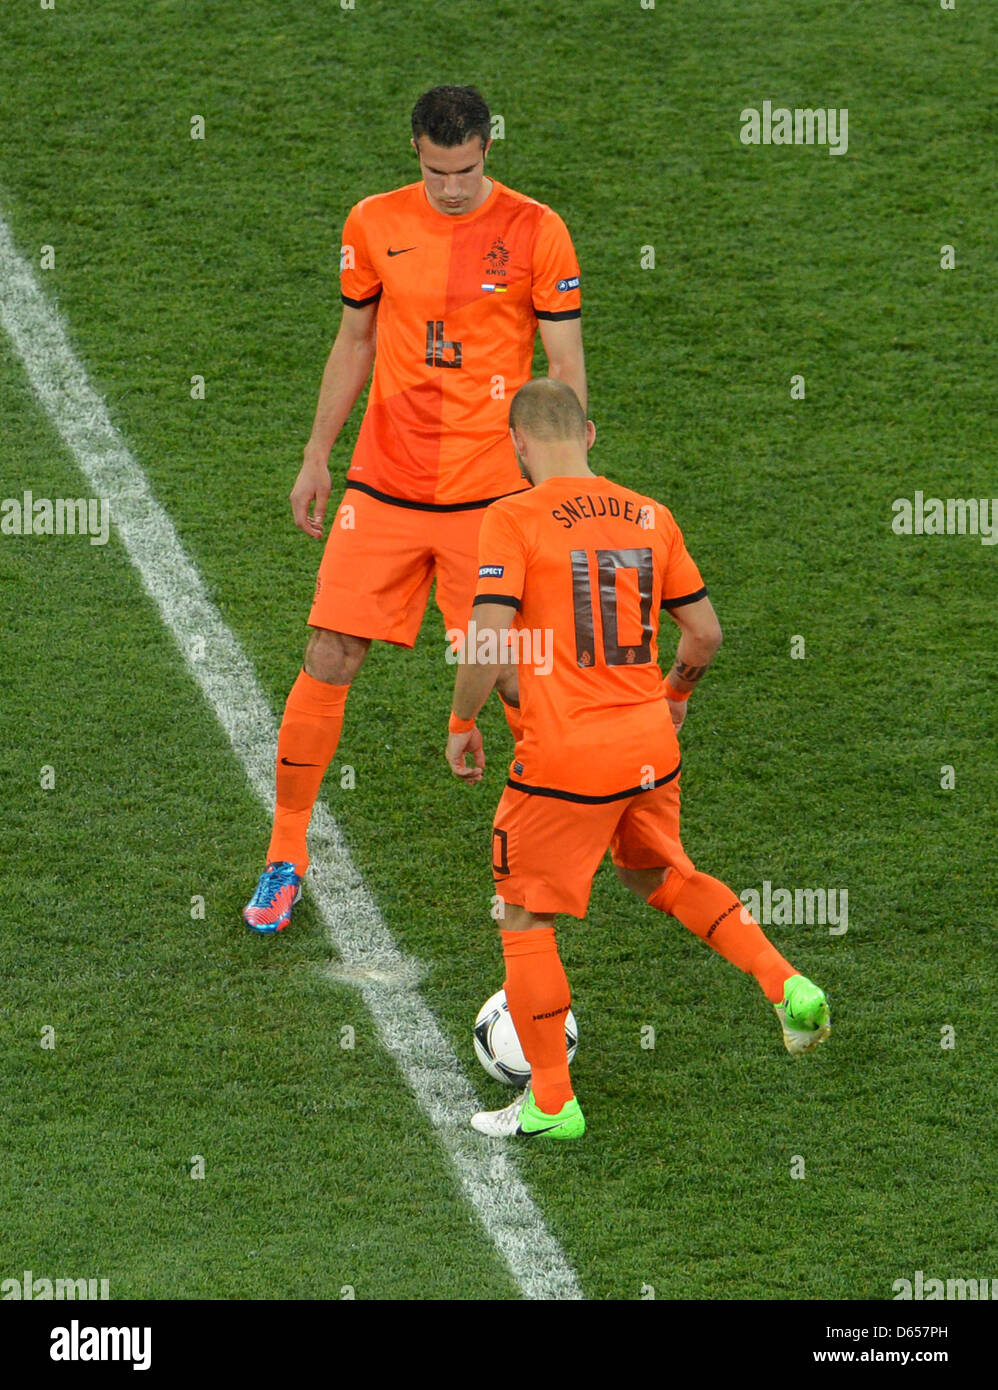 The Netherlands' Wesley Sneijder (R) and Robin van Persie kick off the UEFA EURO 2012 group B soccer match the Netherlands vs Germany at Metalist Stadium in Kharkiv, the Ukraine, 13 June 2012. Photo: Andreas Gebert dpa (Please refer to chapters 7 and 8 of http://dpaq.de/Ziovh for UEFA Euro 2012 Terms & Conditions).  +++(c) dpa - Bildfunk+++ Stock Photo